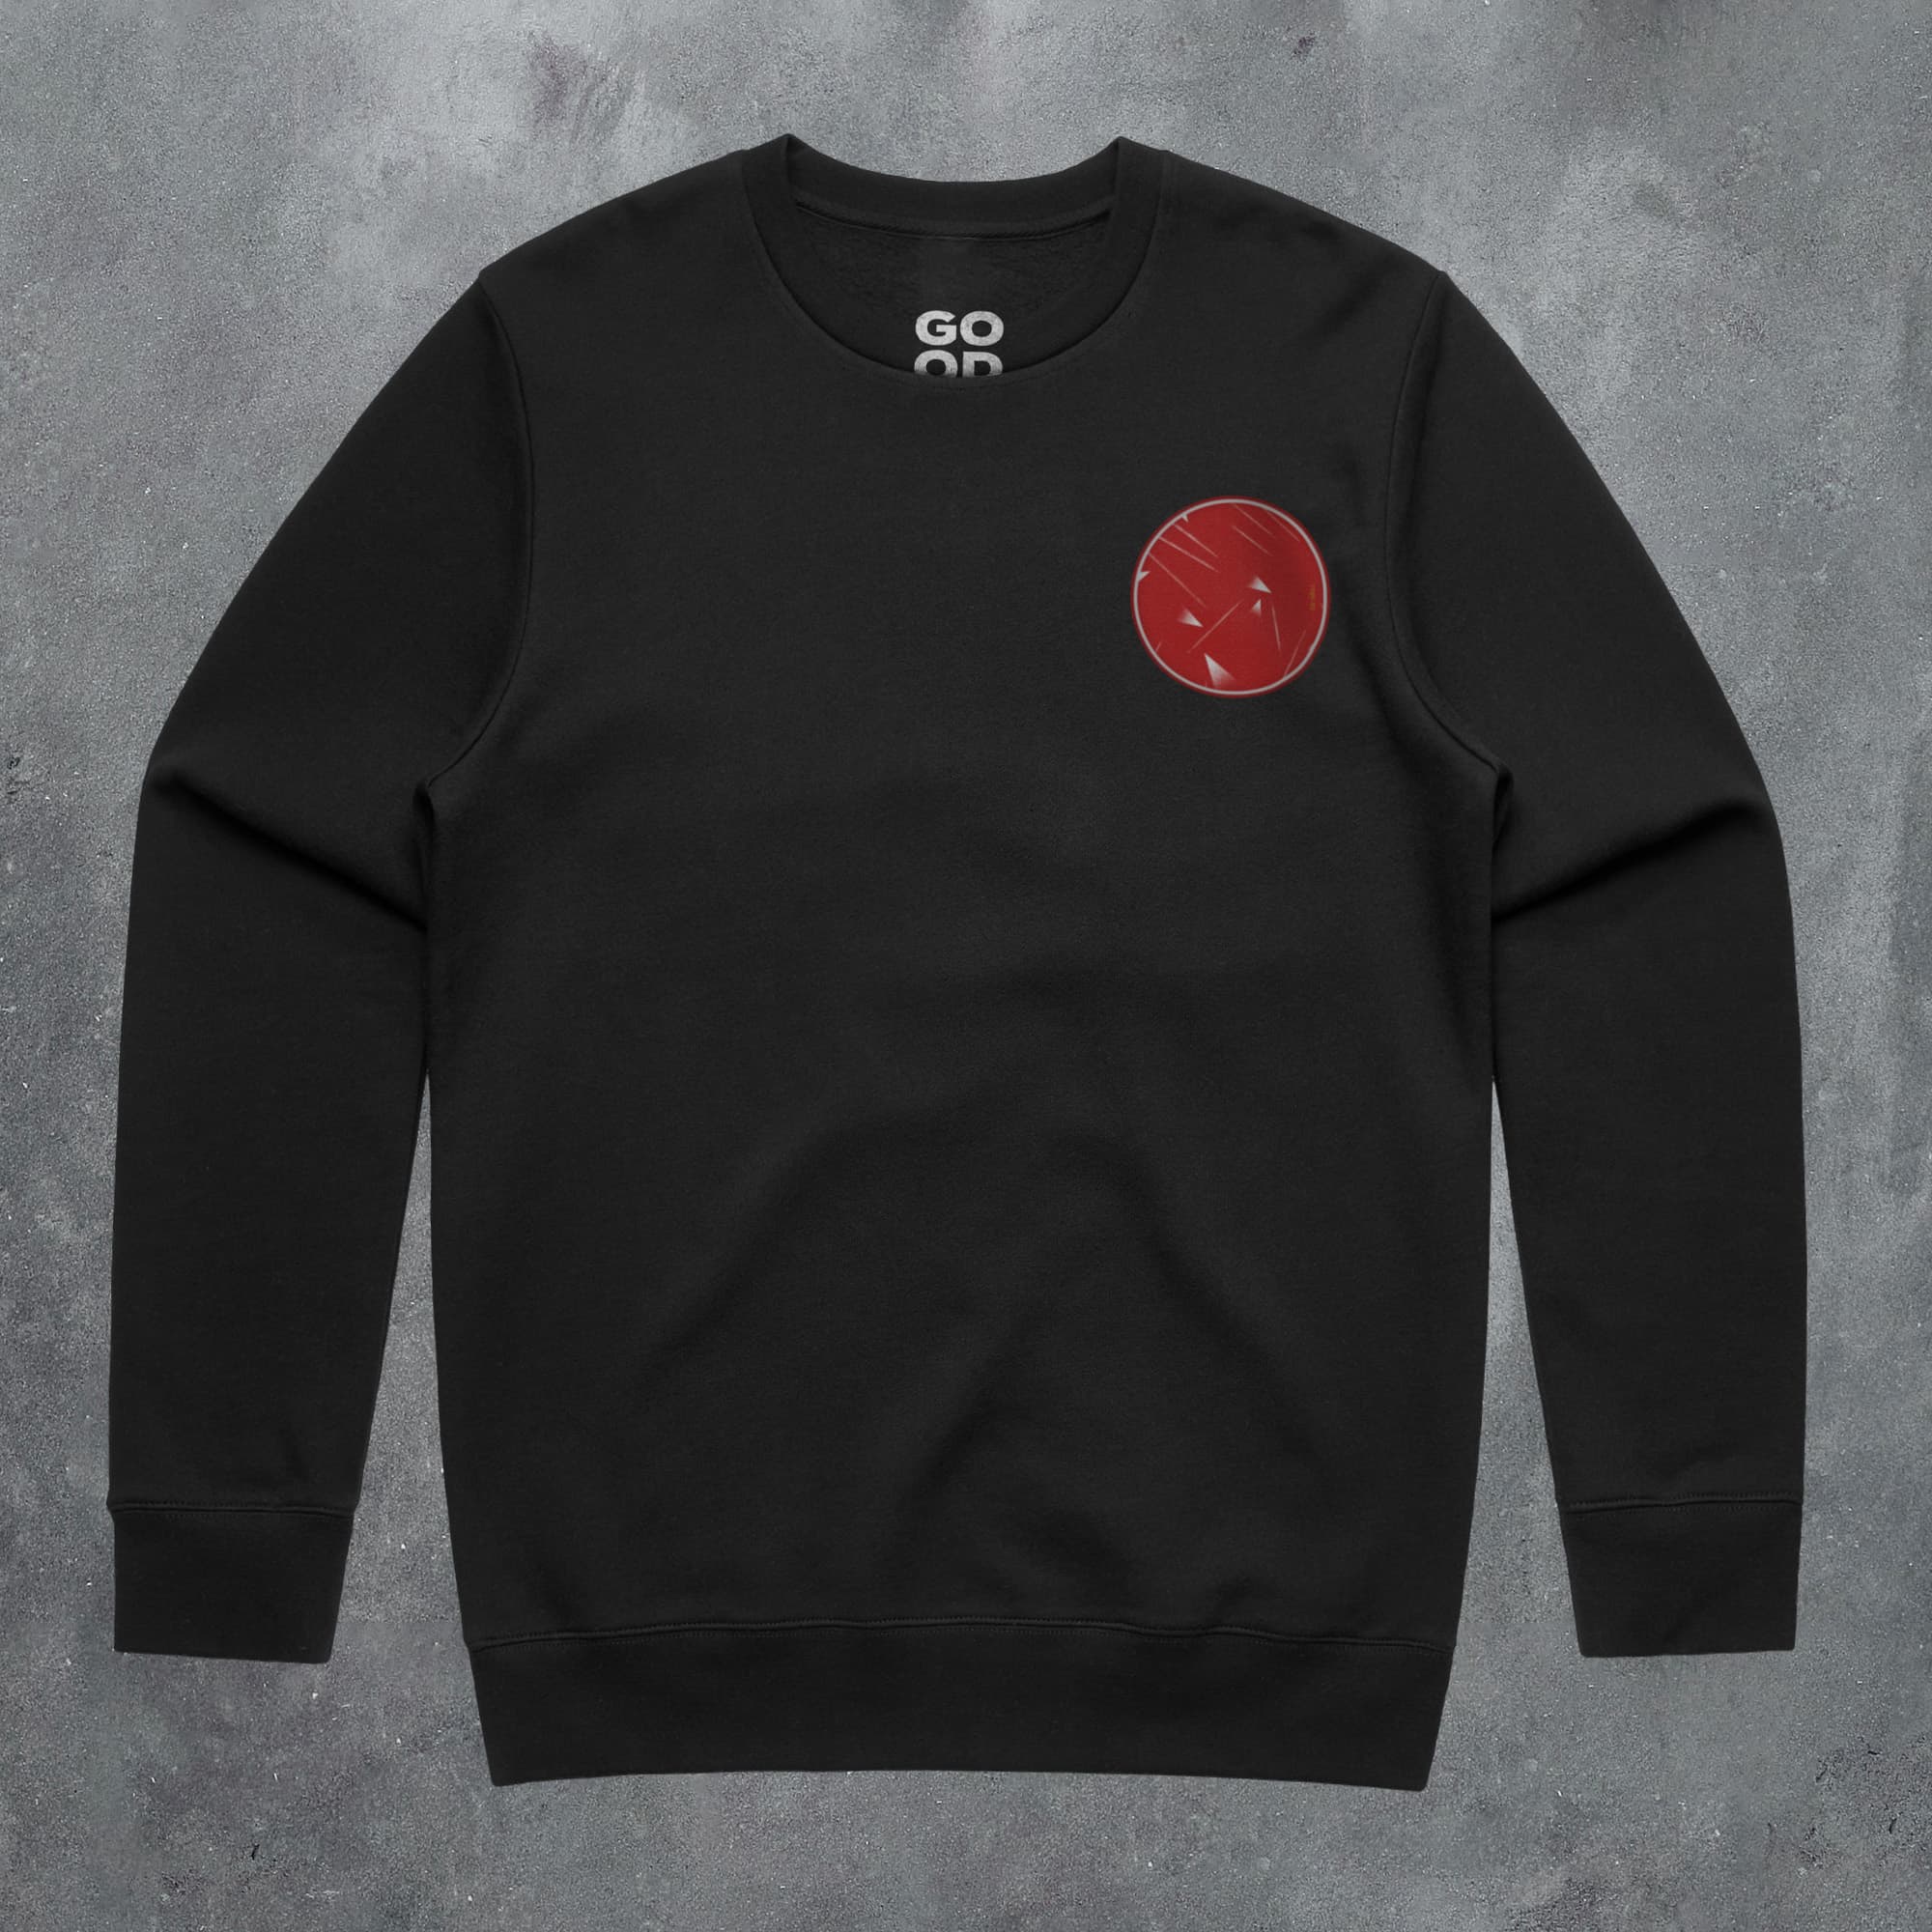 a black sweatshirt with a red smiley face on it